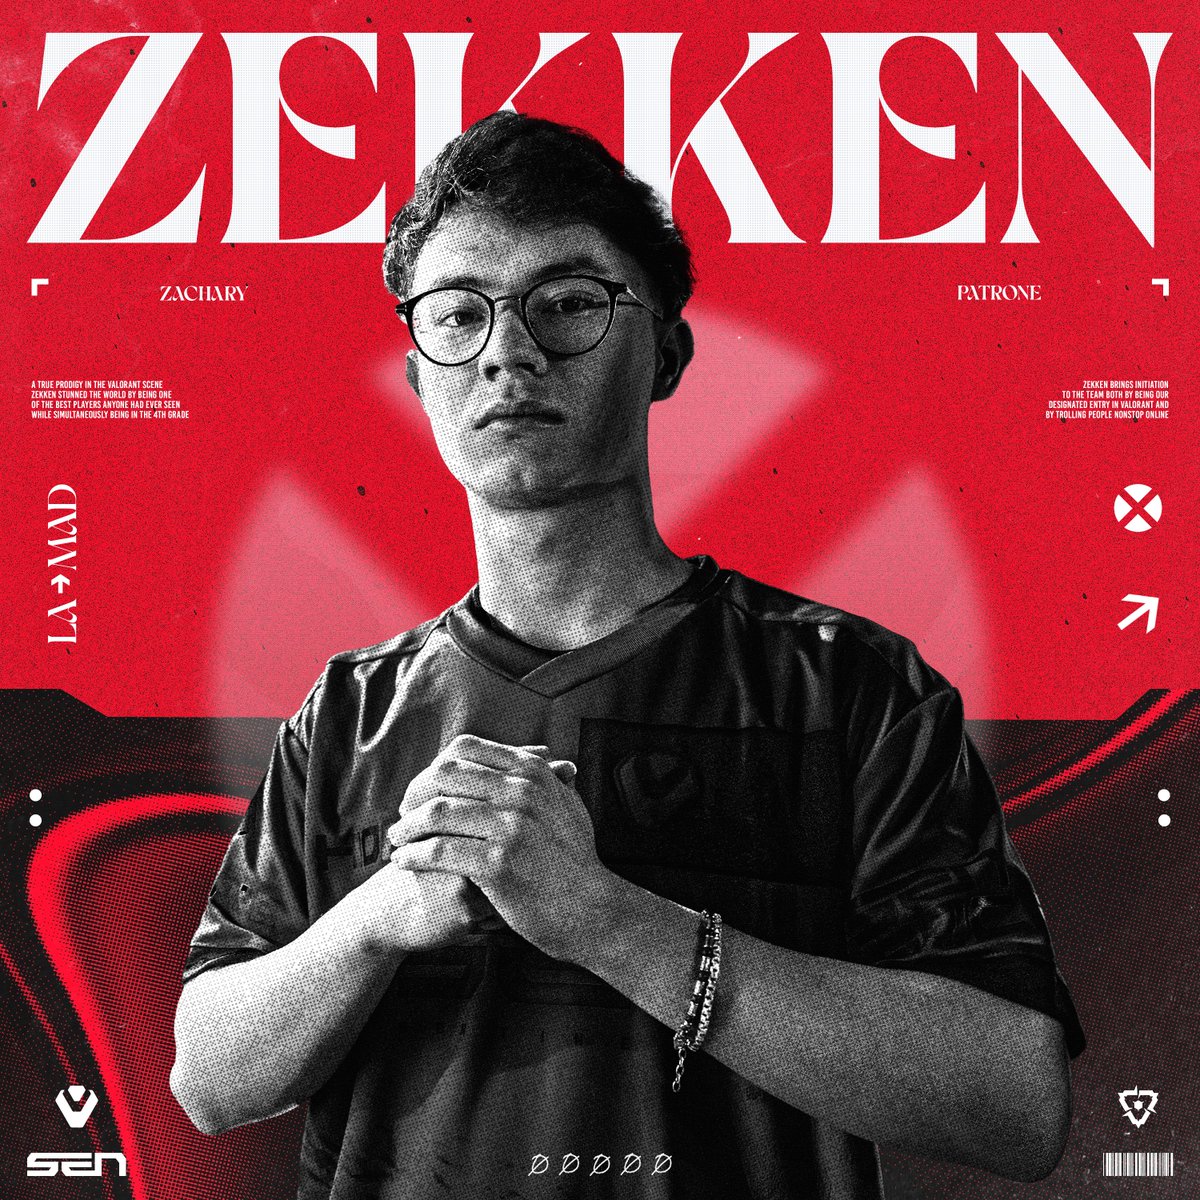 Best duelist in NA heading to Madrid → Player Poster Concept @zekkenVAL